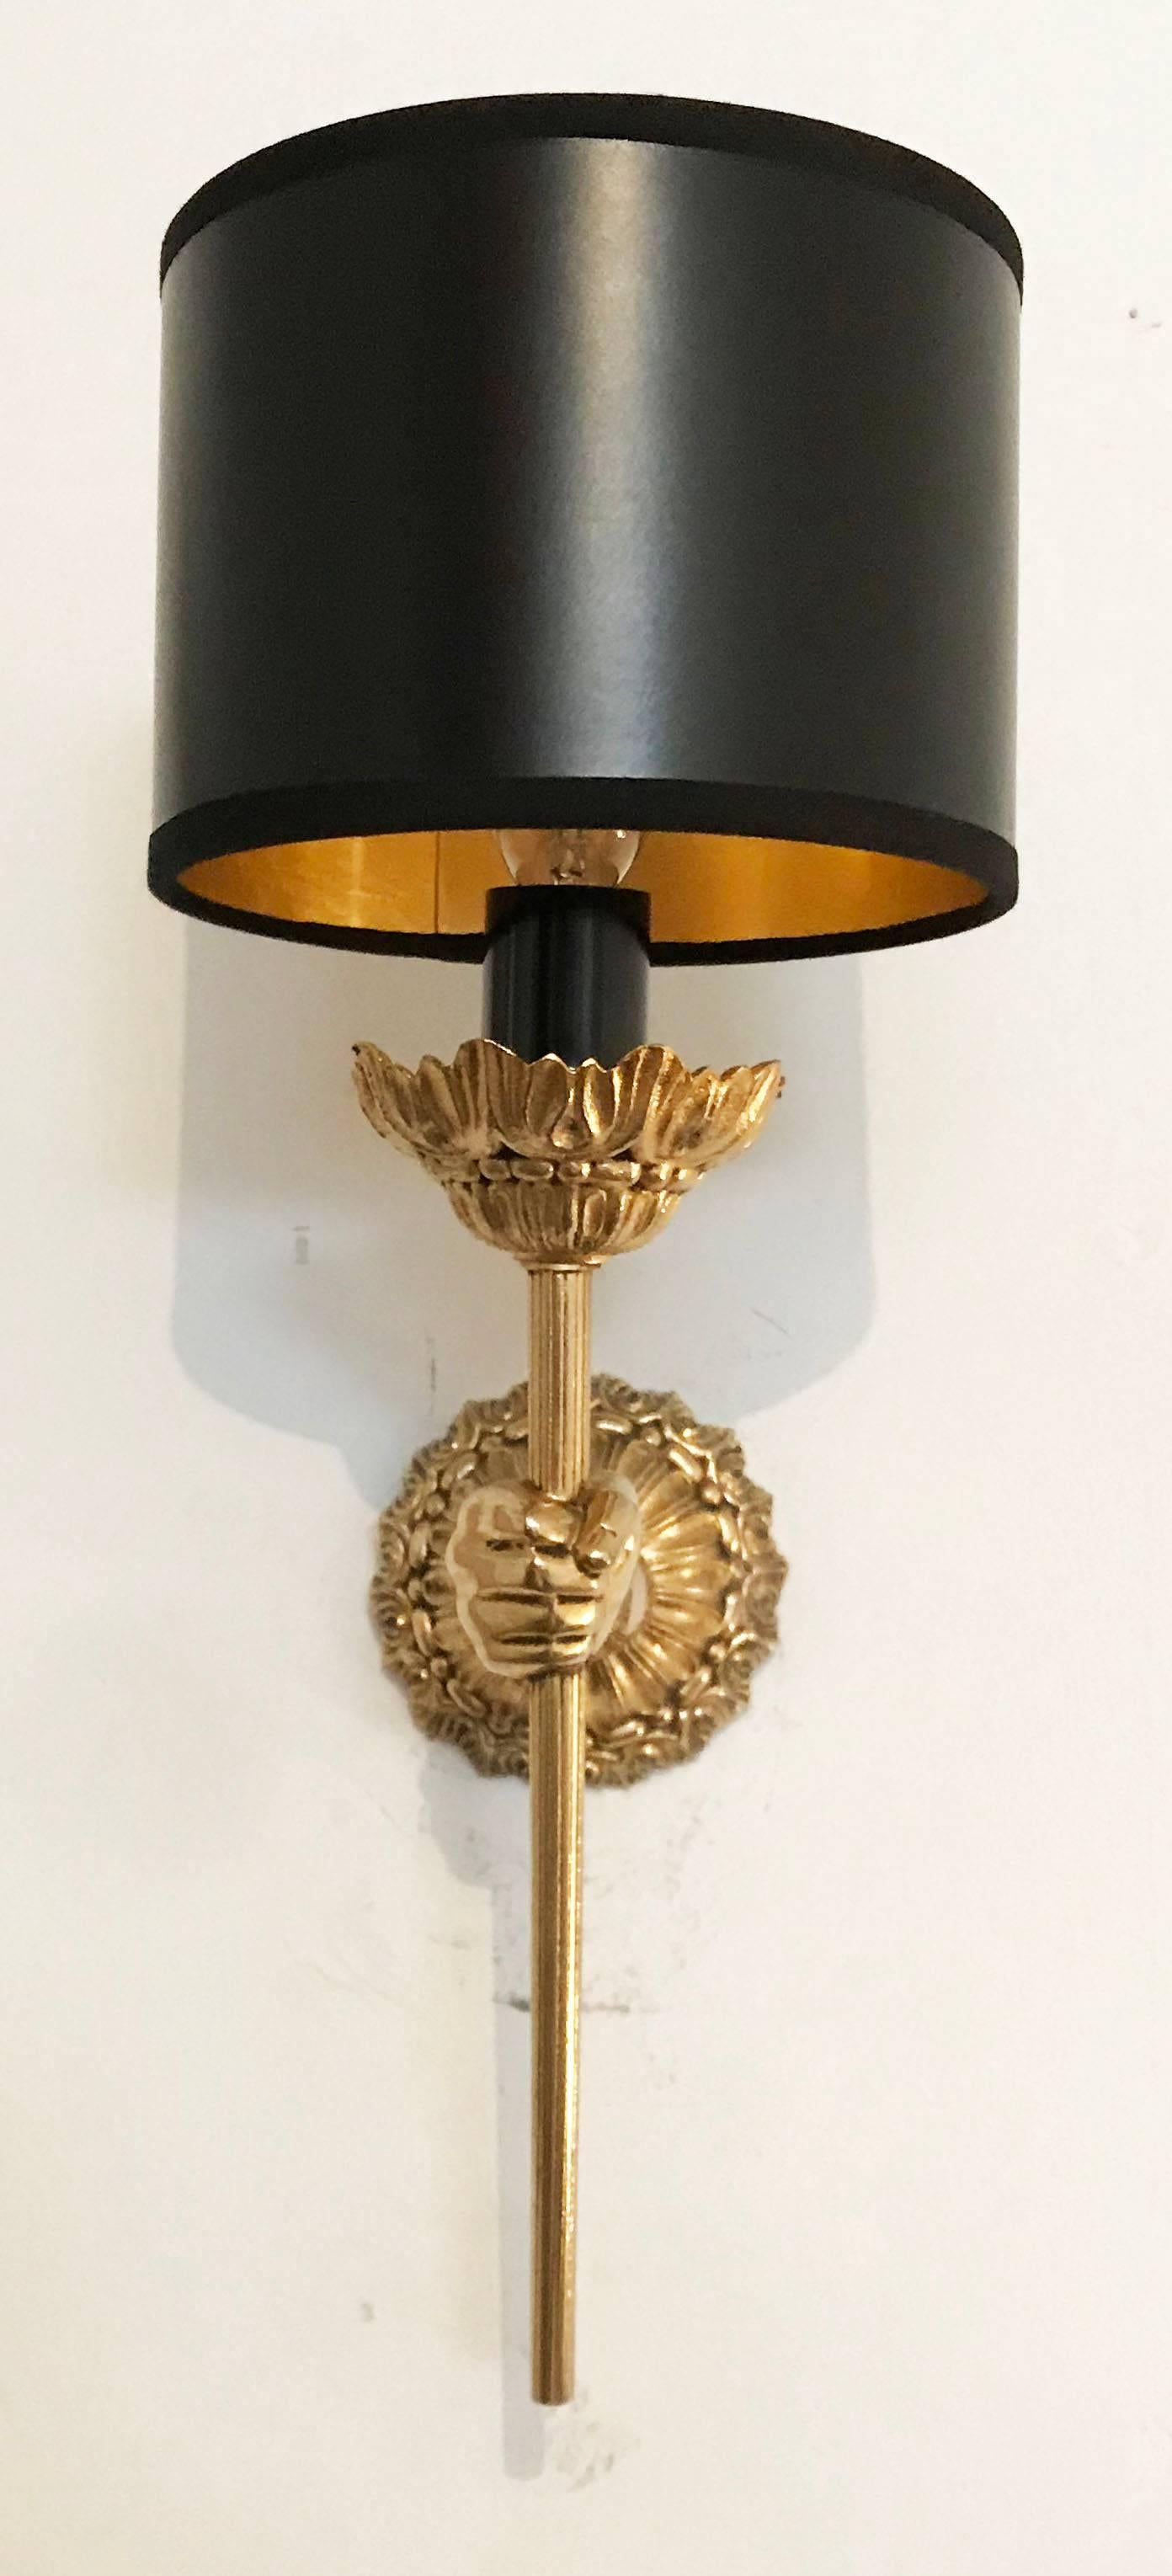 Pair of Maison Lancel “Hand” sconces
US rewired and in working condition
40 watts max bulb.
Priced by pair
Back plate: 3 inches diameter.
Custom backplate available.